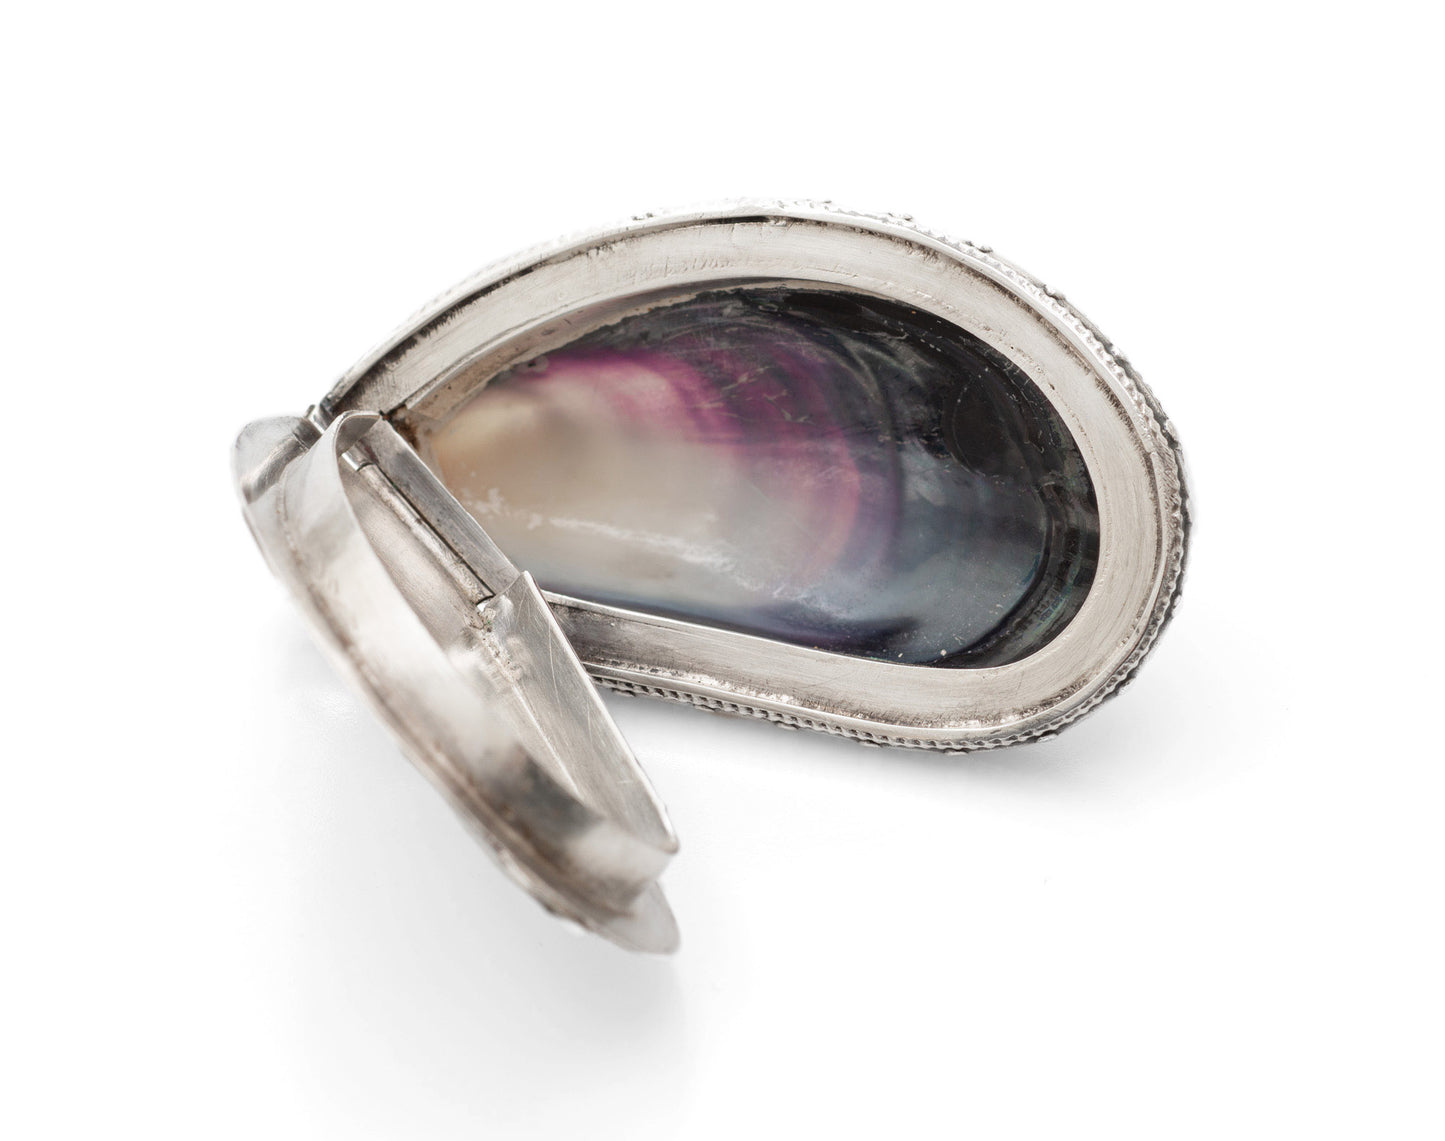 Antique Georgian Silver & Polished Natural Mussel Shell Snuff Box c1820 (Code 2447)